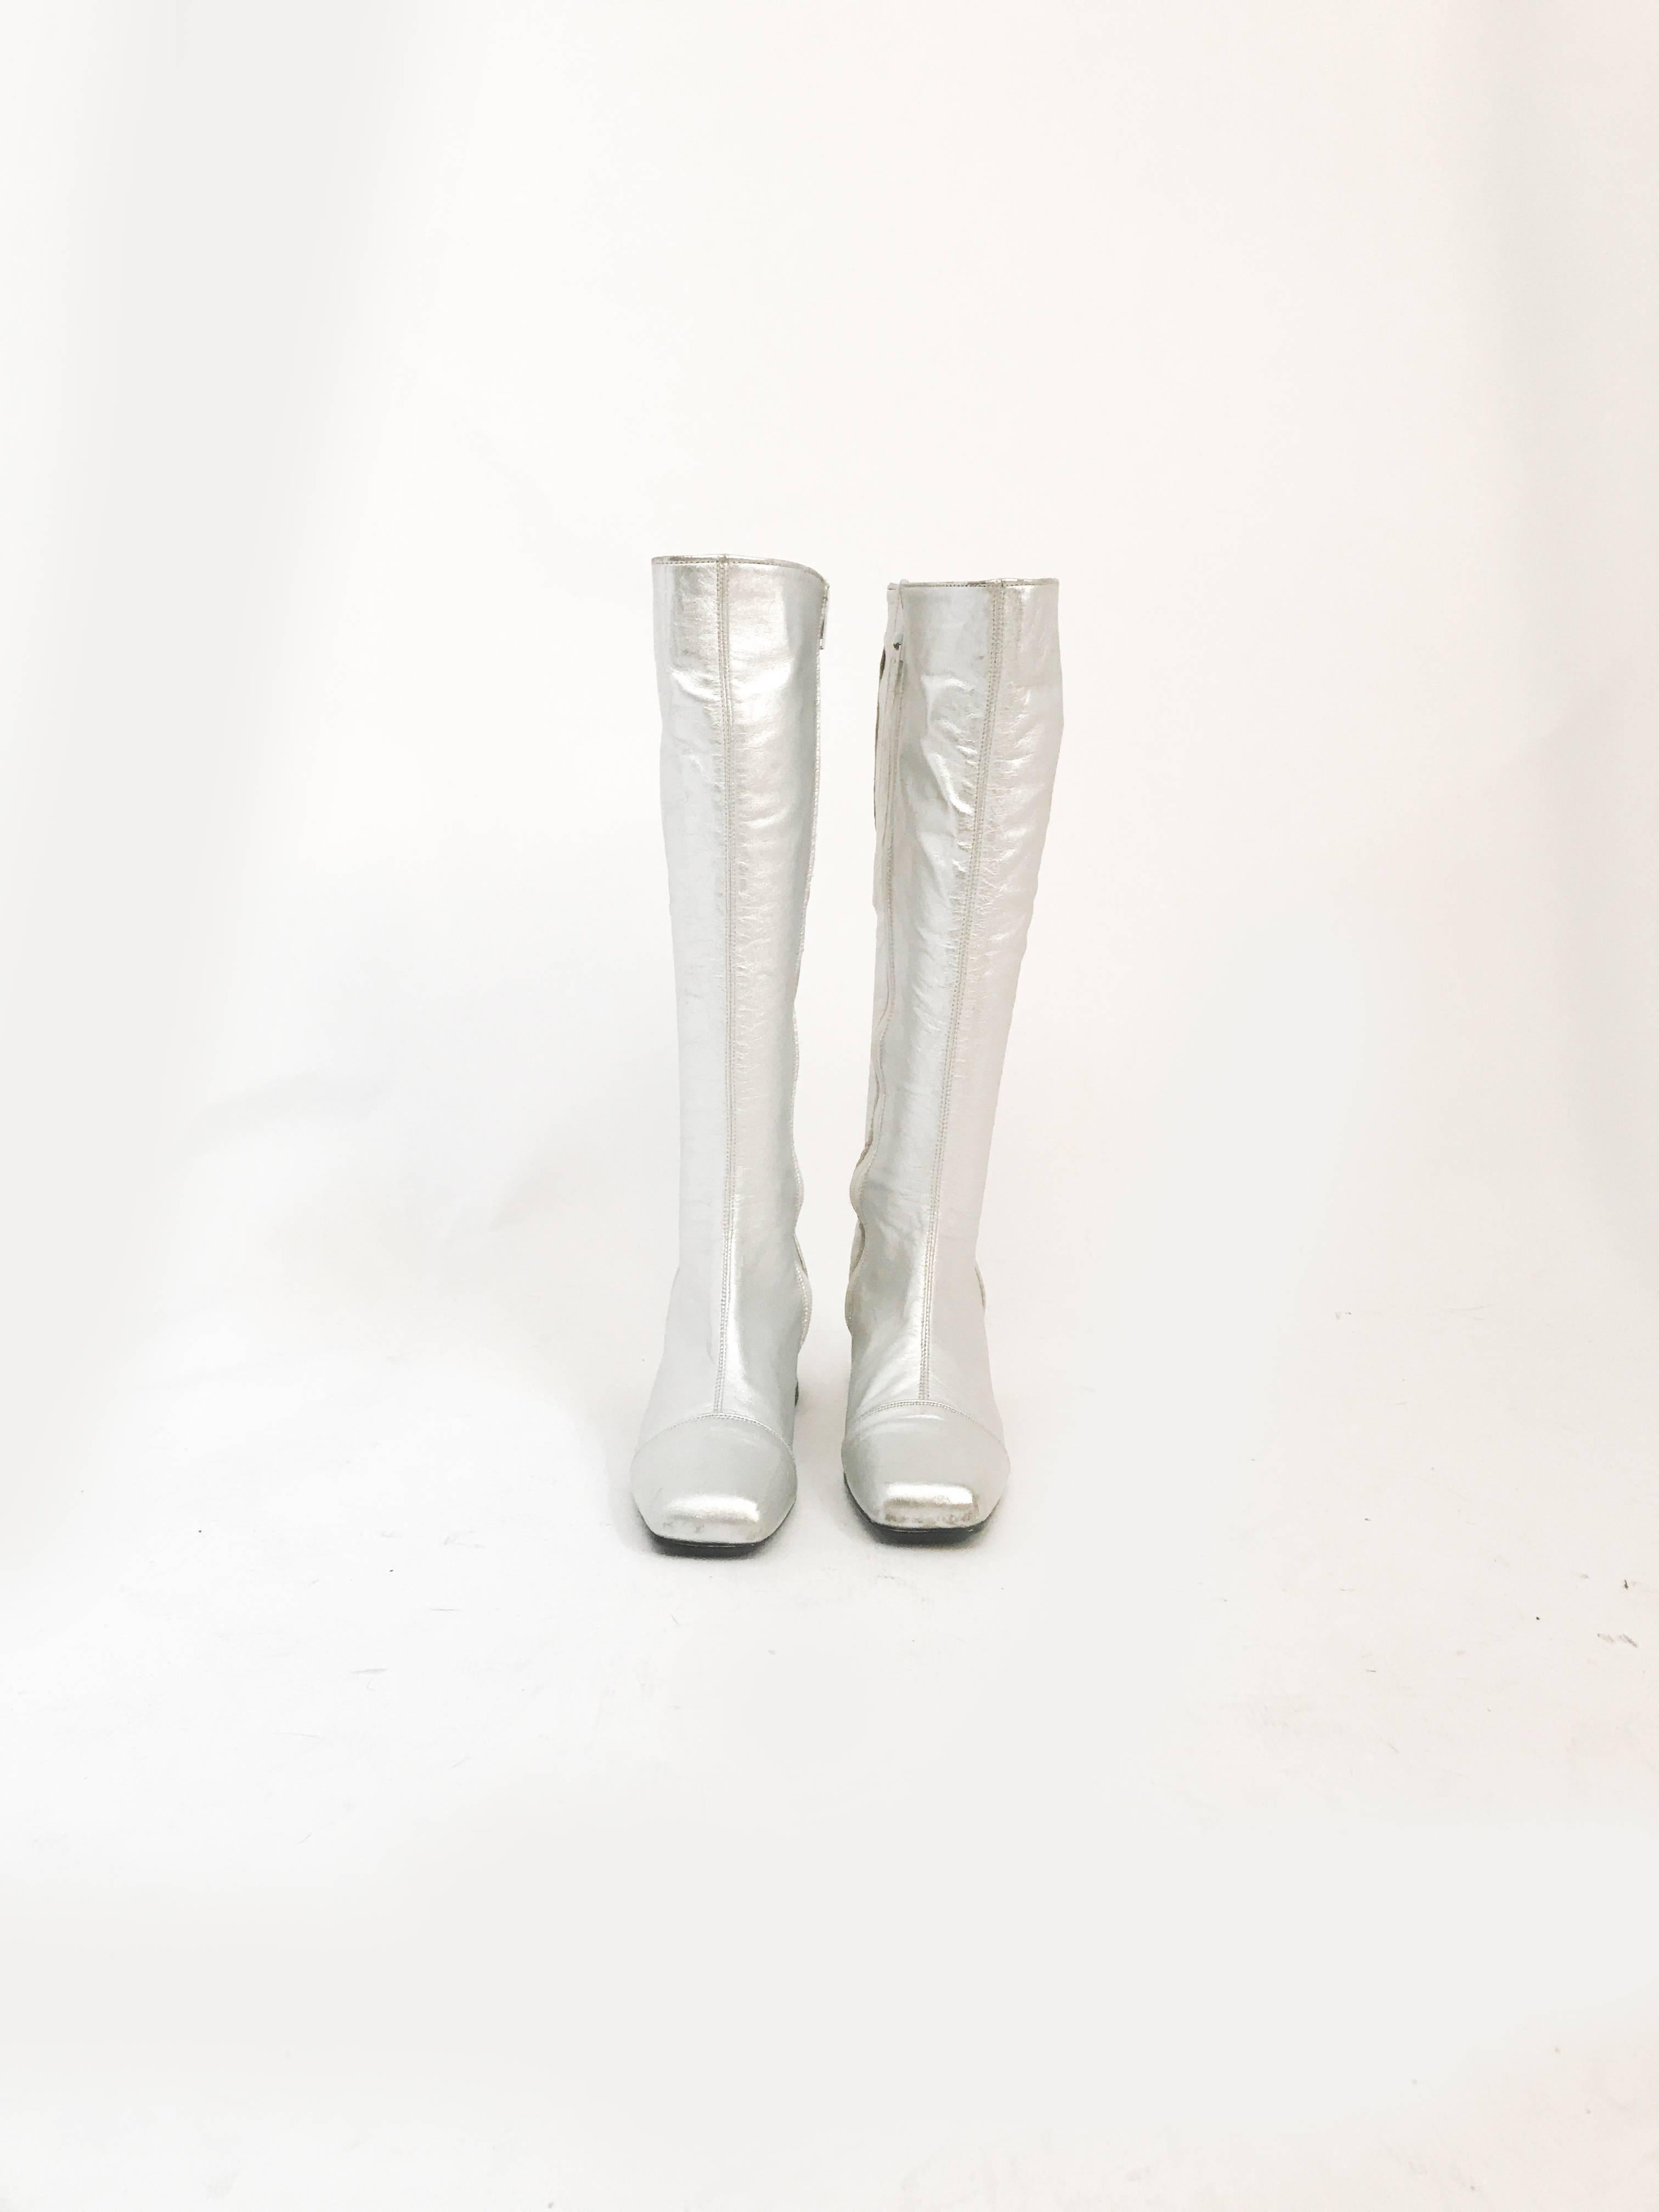 Late 1960s Silver Leather Go Go Boots. Silver leather go go boots with chunky heel and strong elastic at the calf. Barley worn.